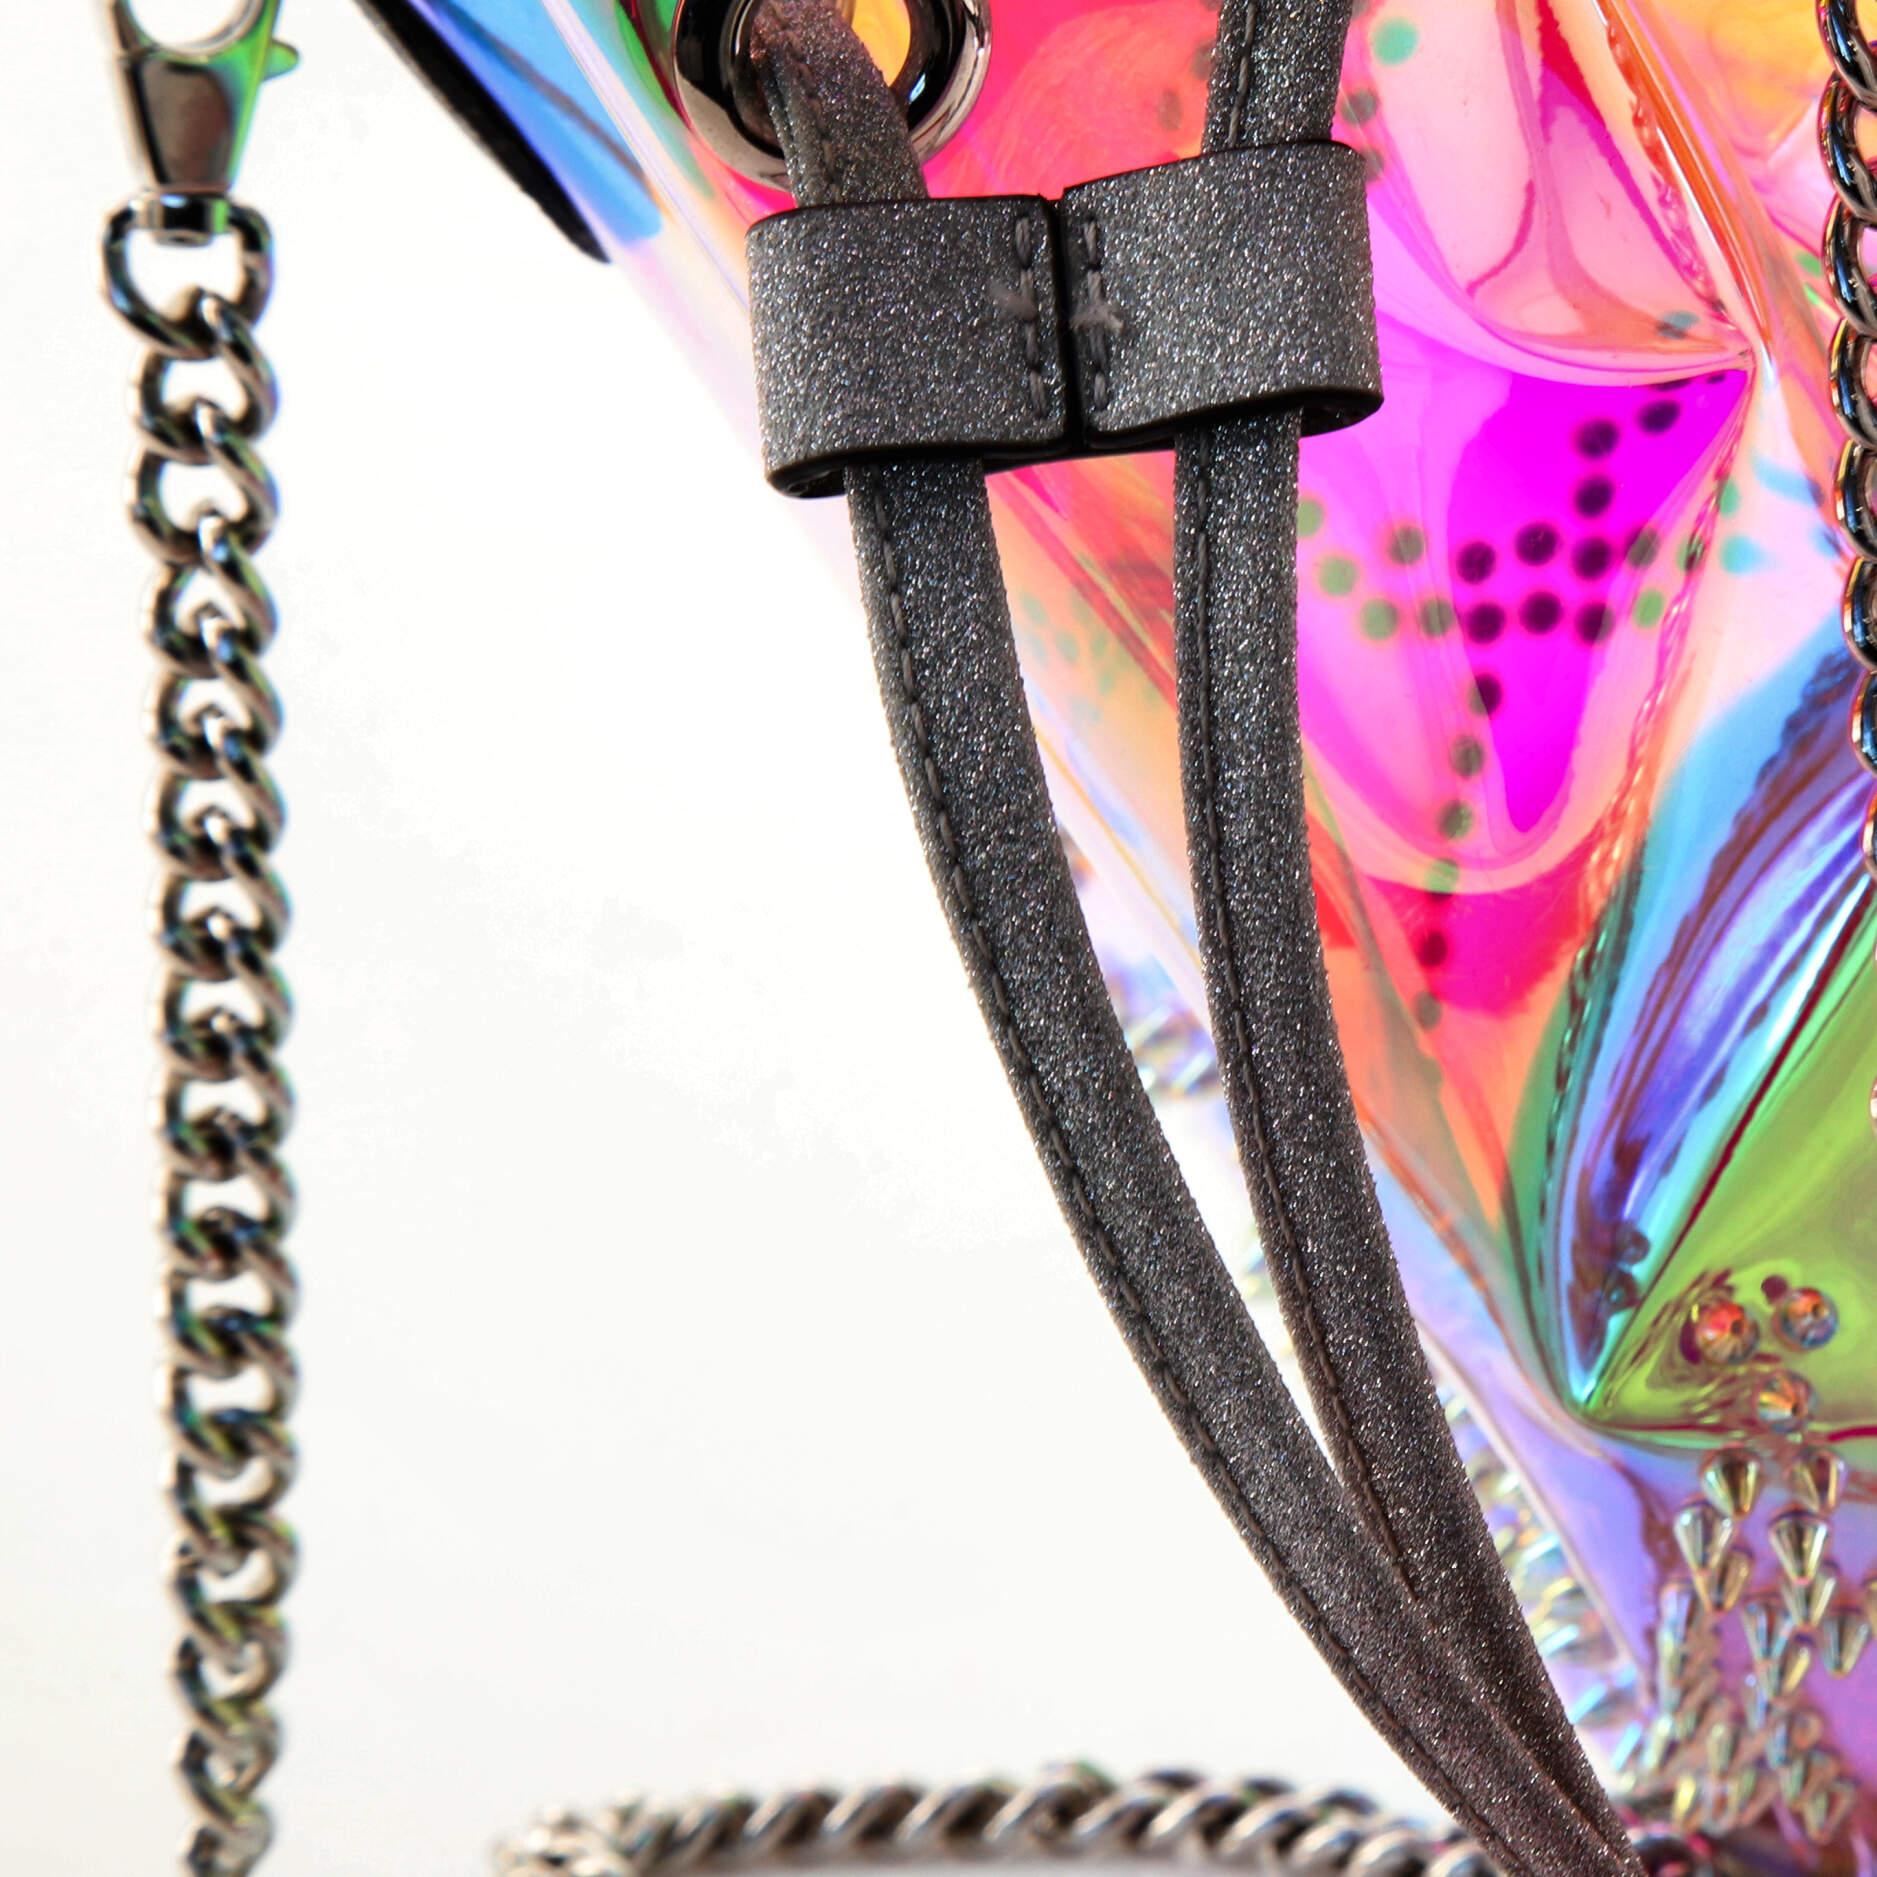 Christian Louboutin Marie Jane Bucket Bag Spiked Holographic PVC 1